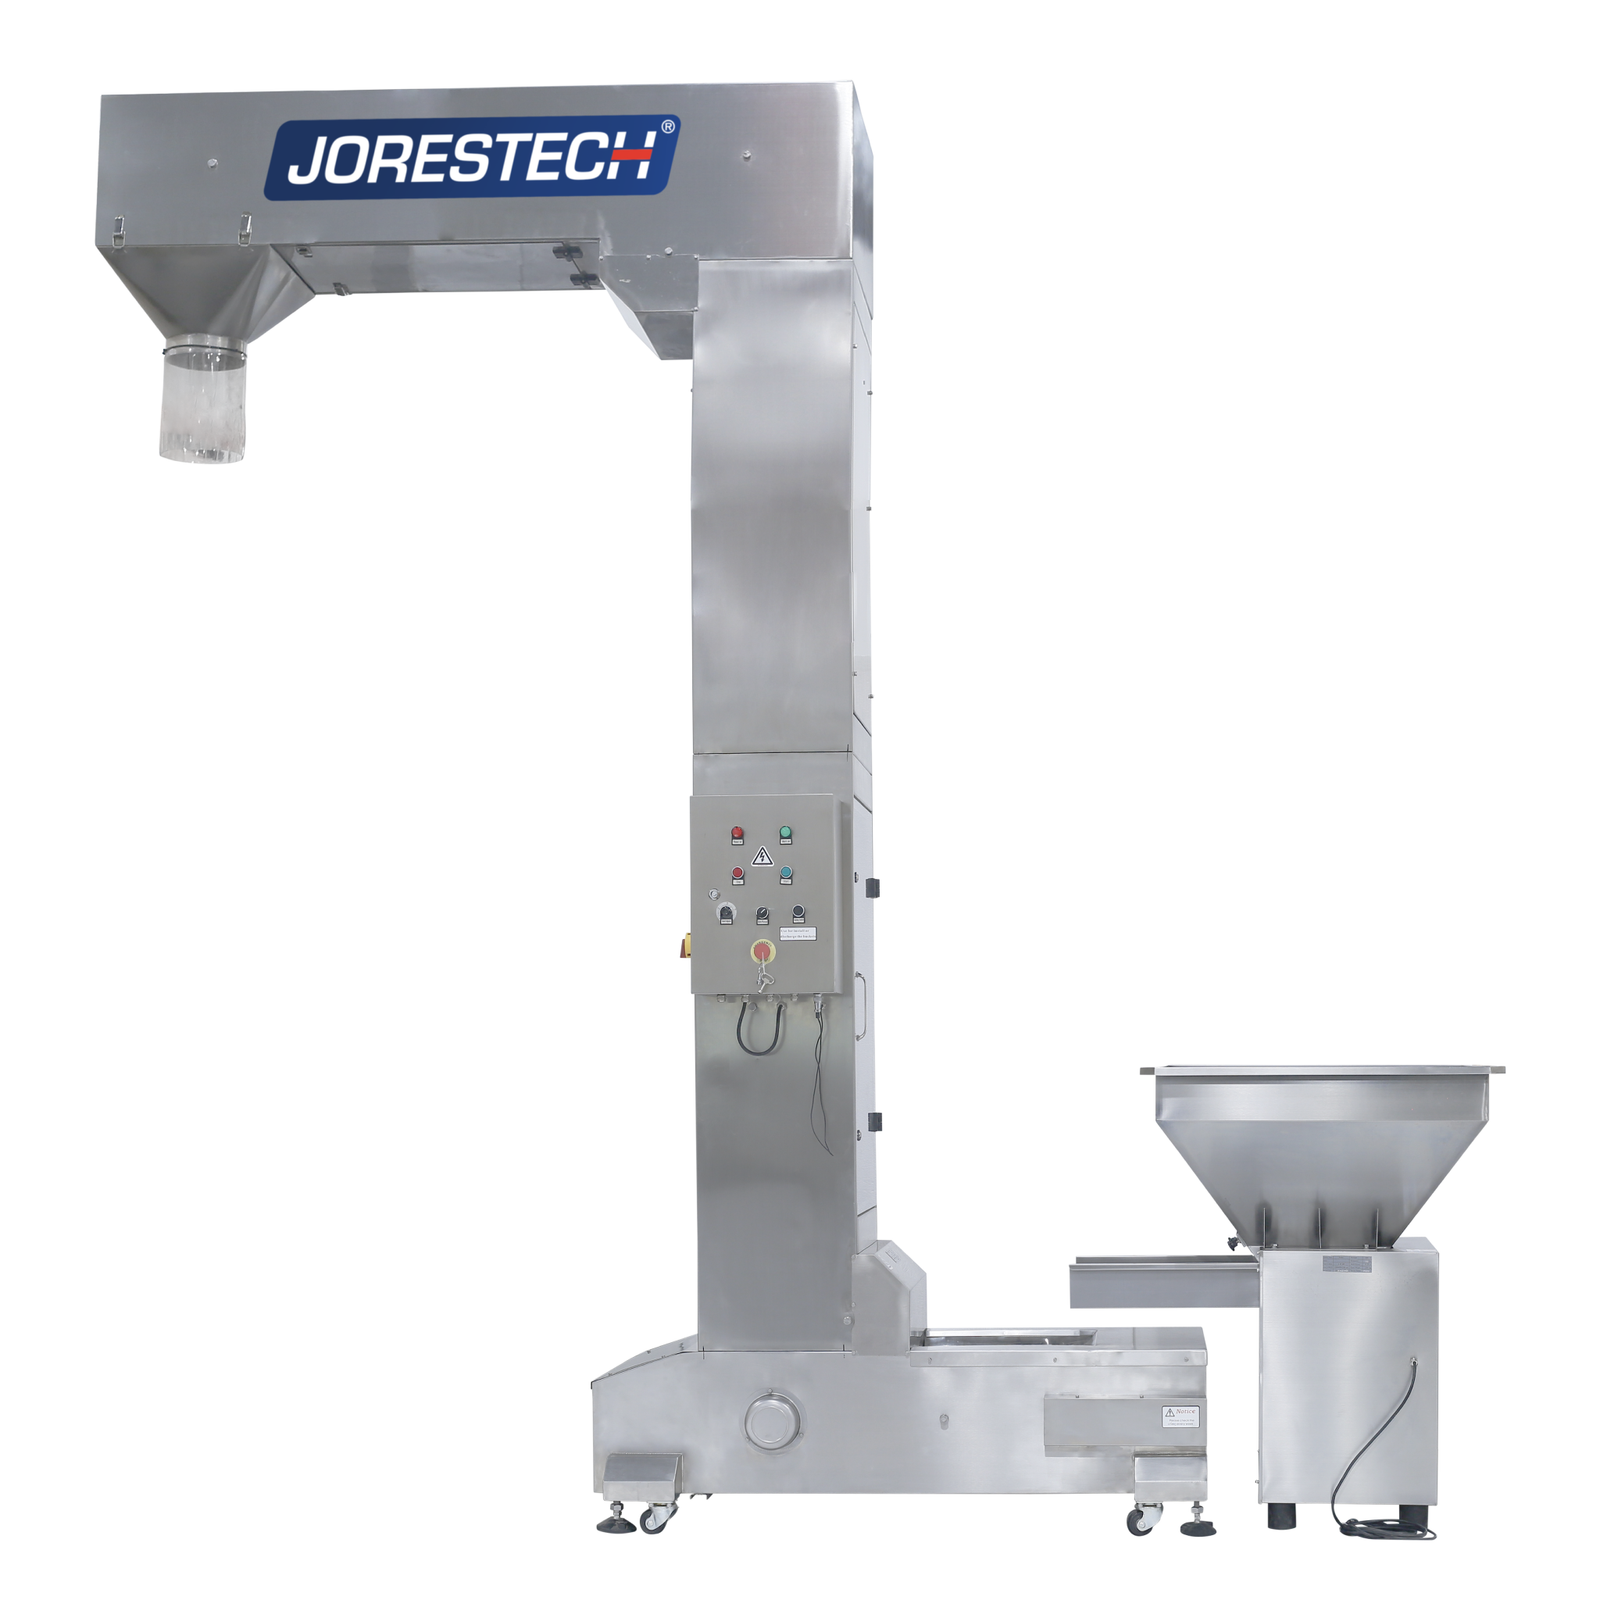 The Jorestech Stainless Steel Motorized Bucket Elevator in a side view over white background